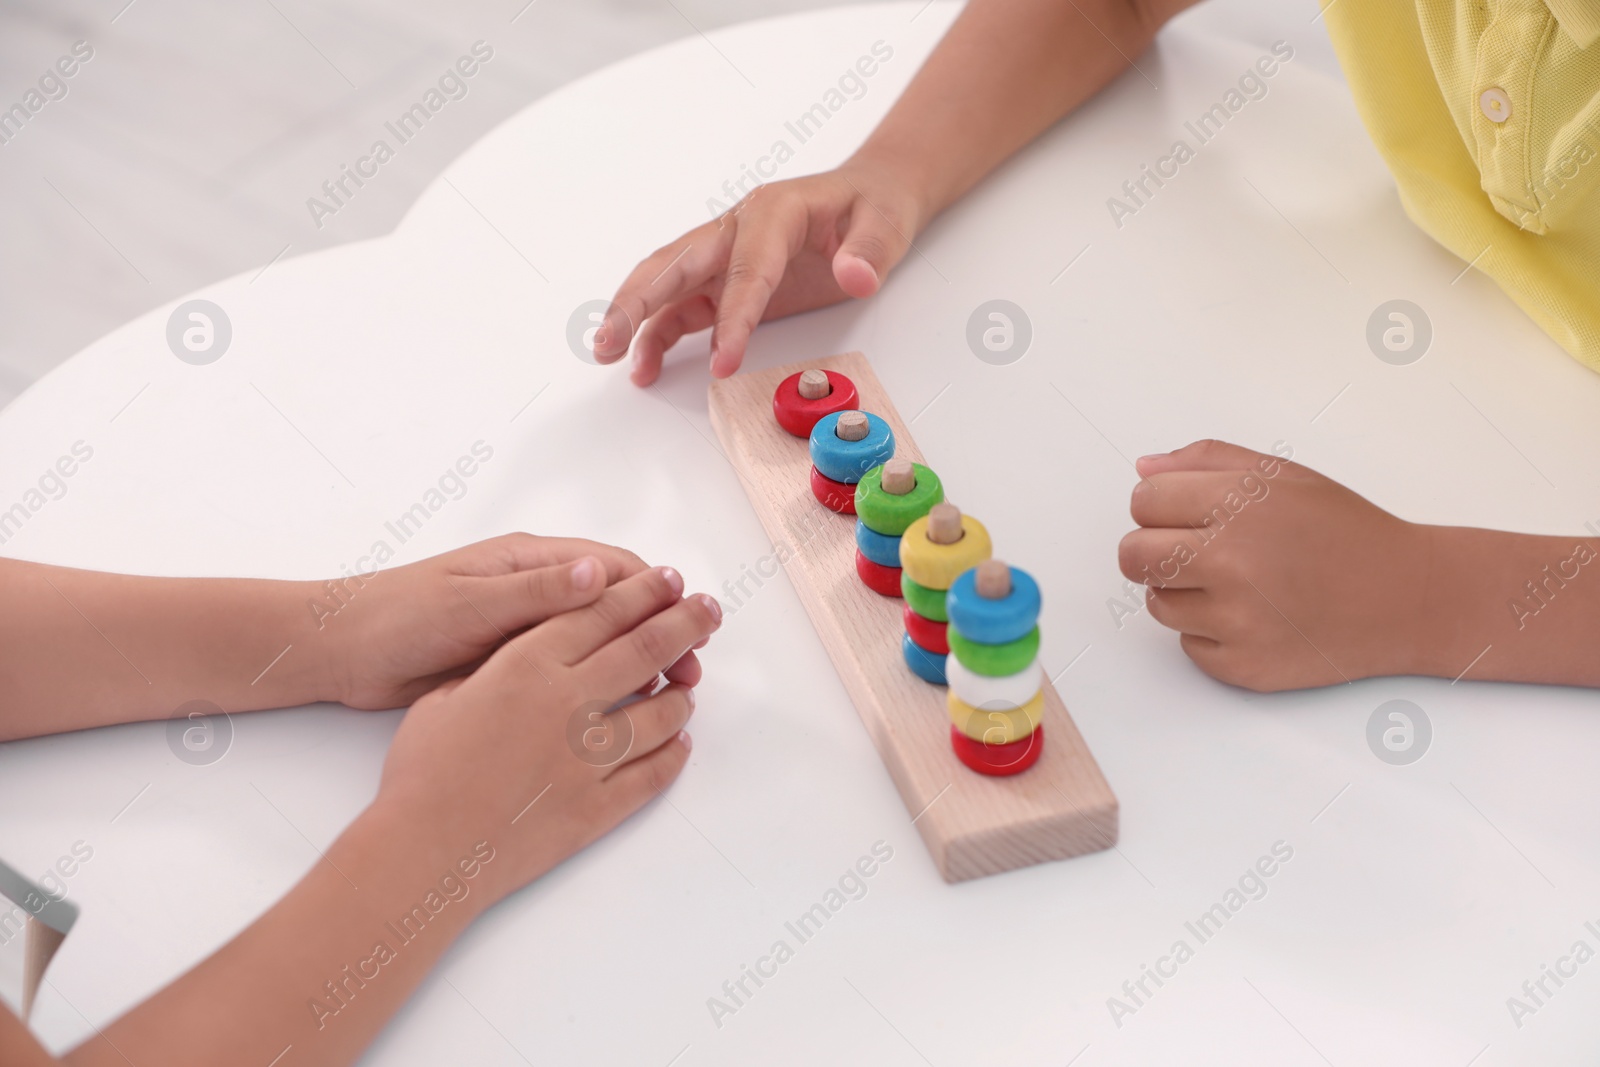 Photo of Little children playing with stacking and counting game at desk, closeup. Kindergarten activities for motor skills development